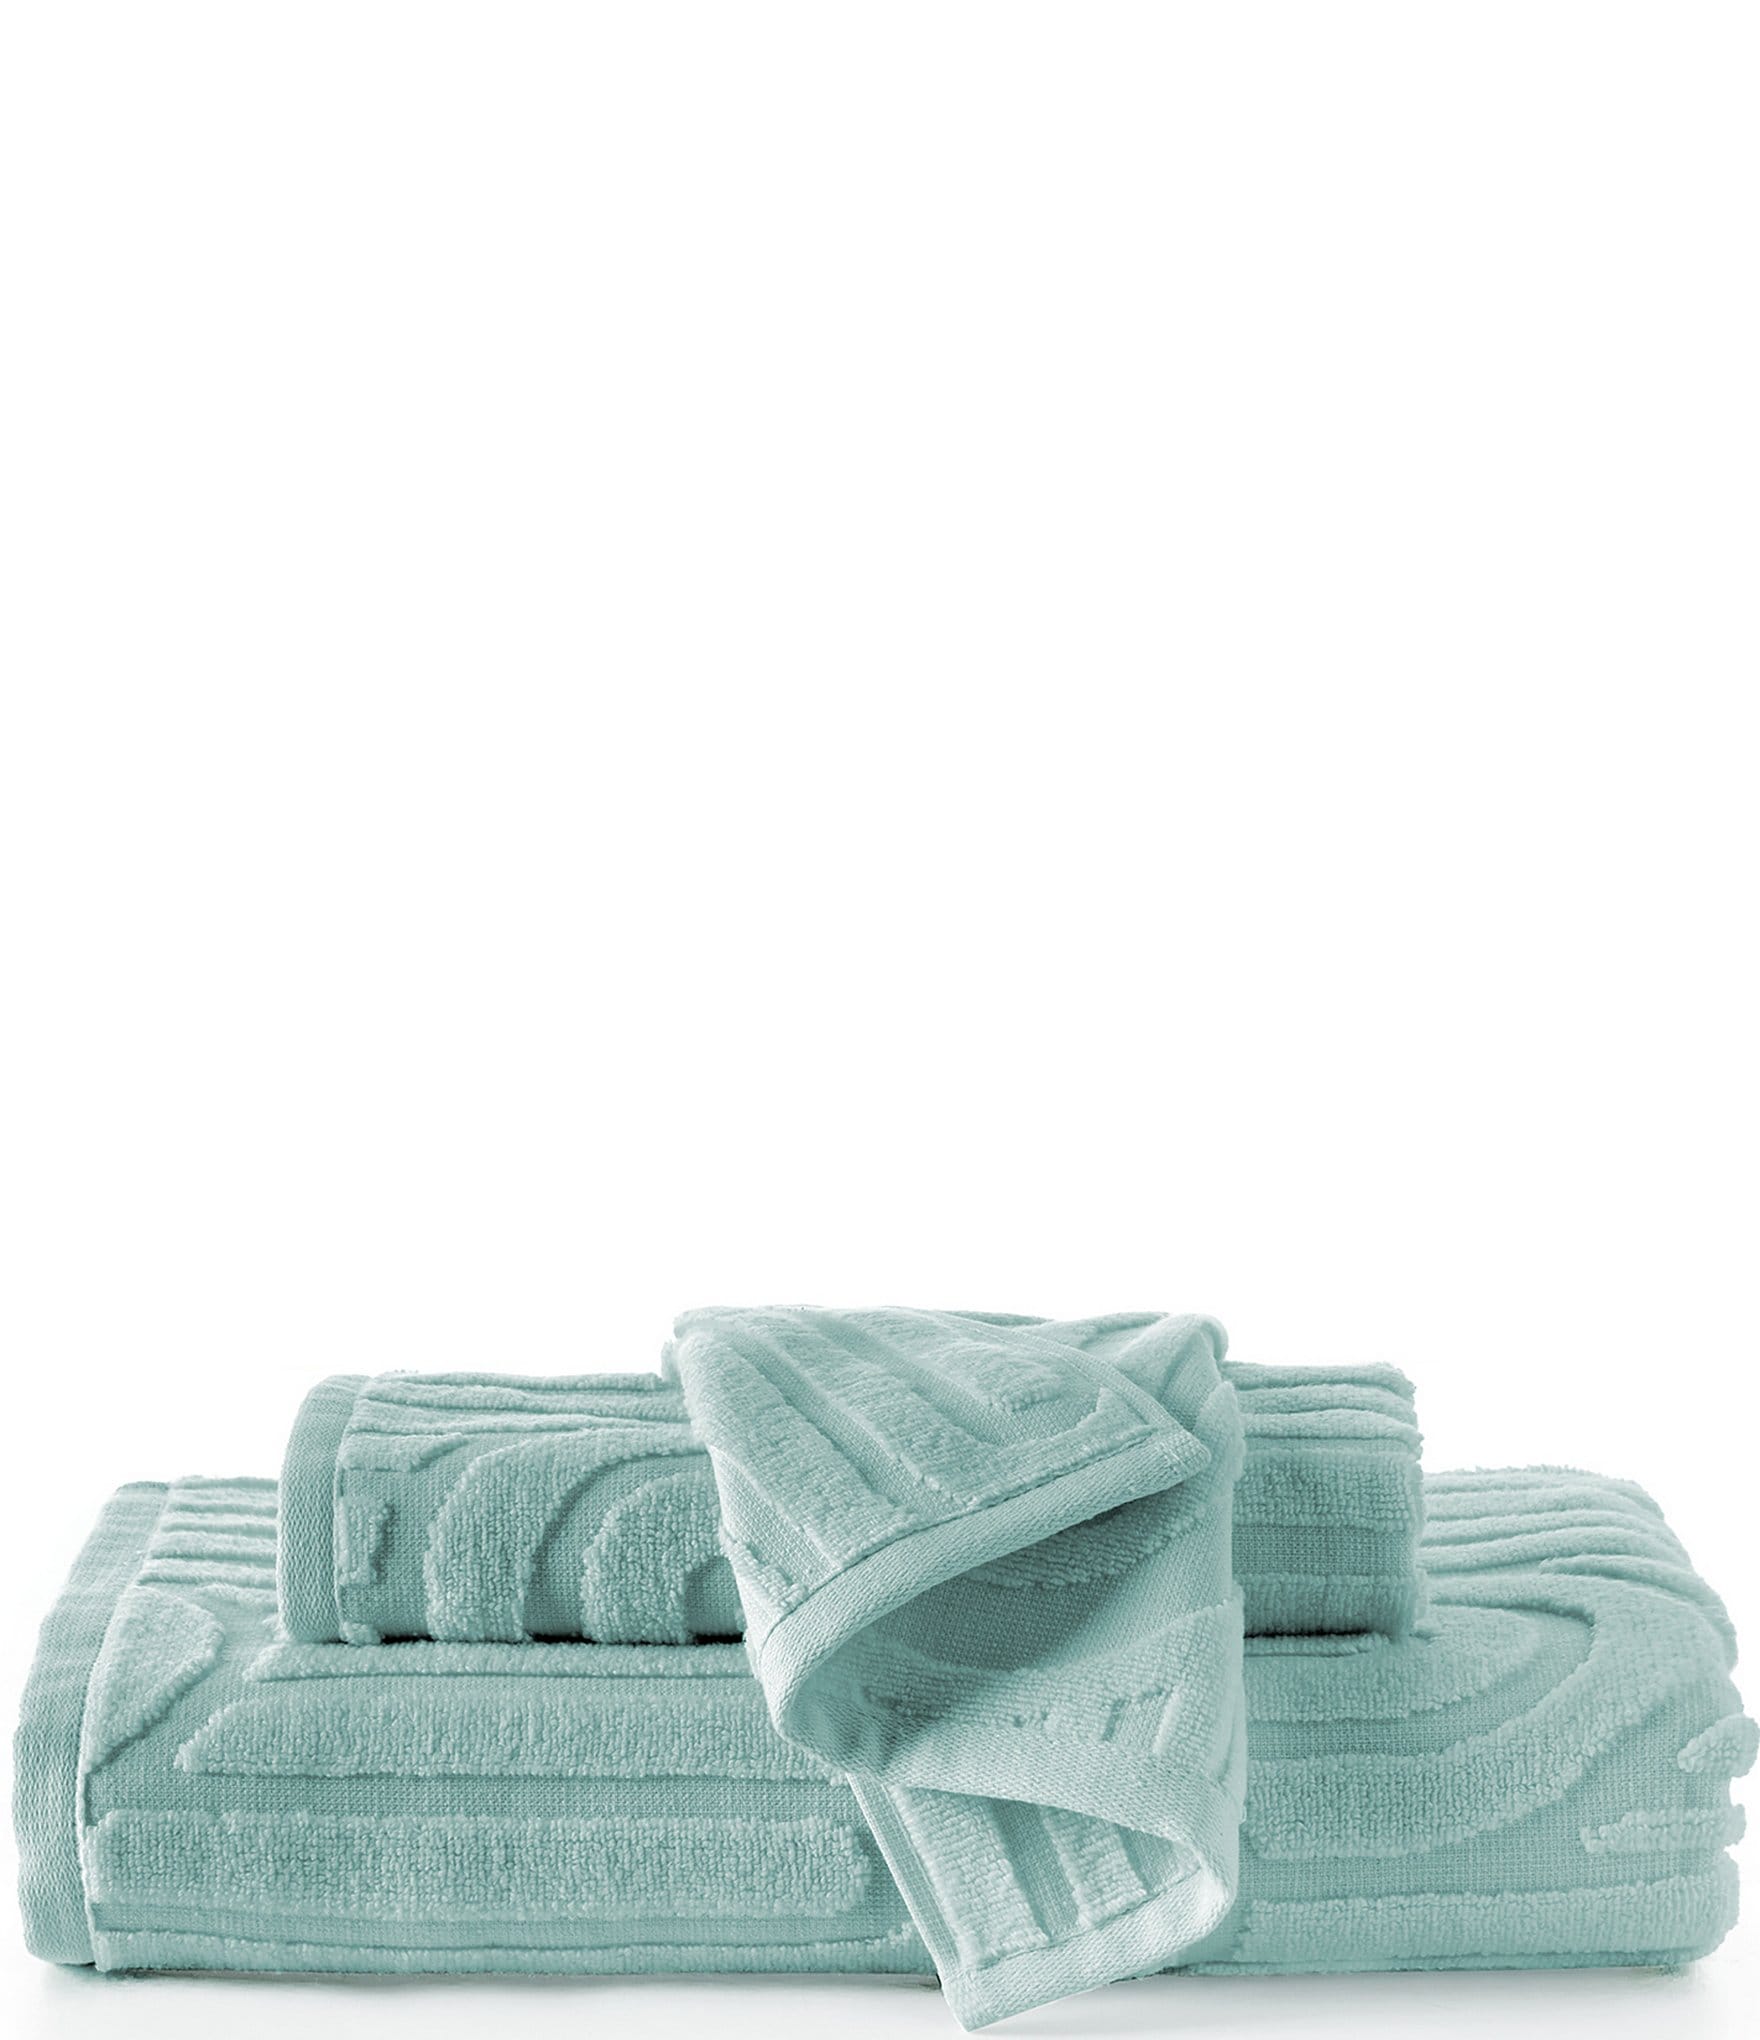 UGG Mirabelle Beach Towel - Pool Party